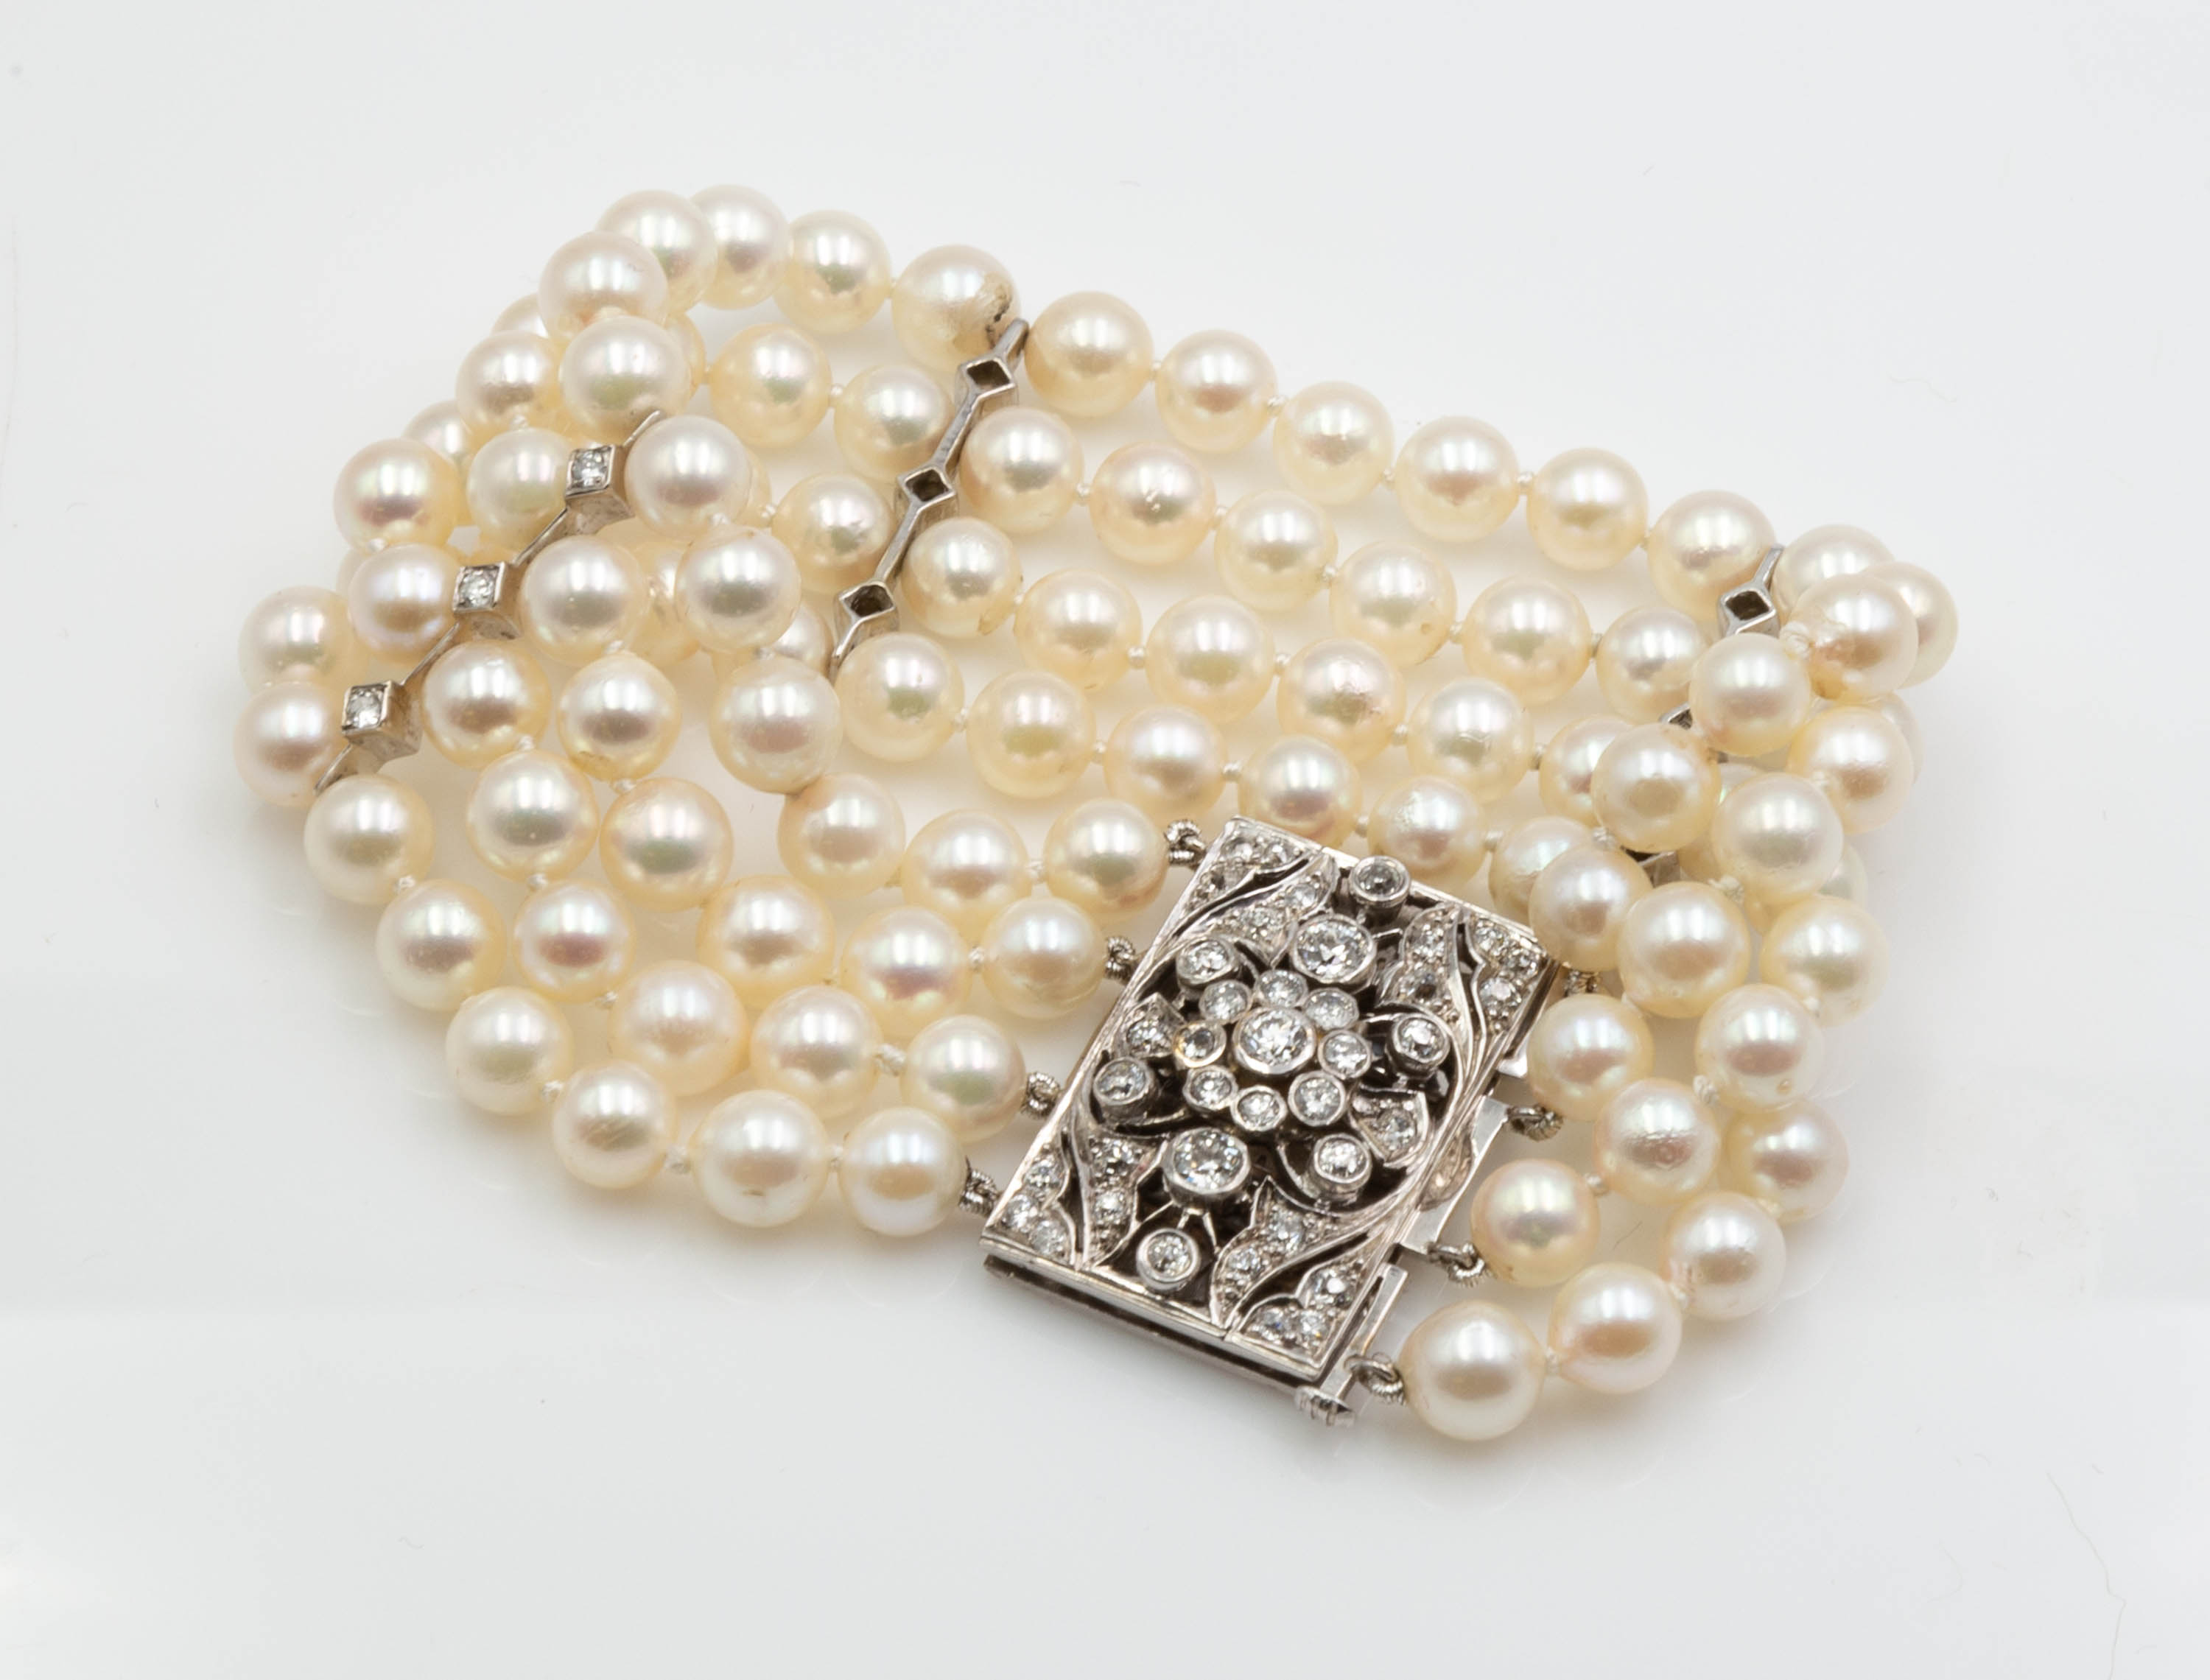 FOUR STRAND PEARL BRACELET WITH